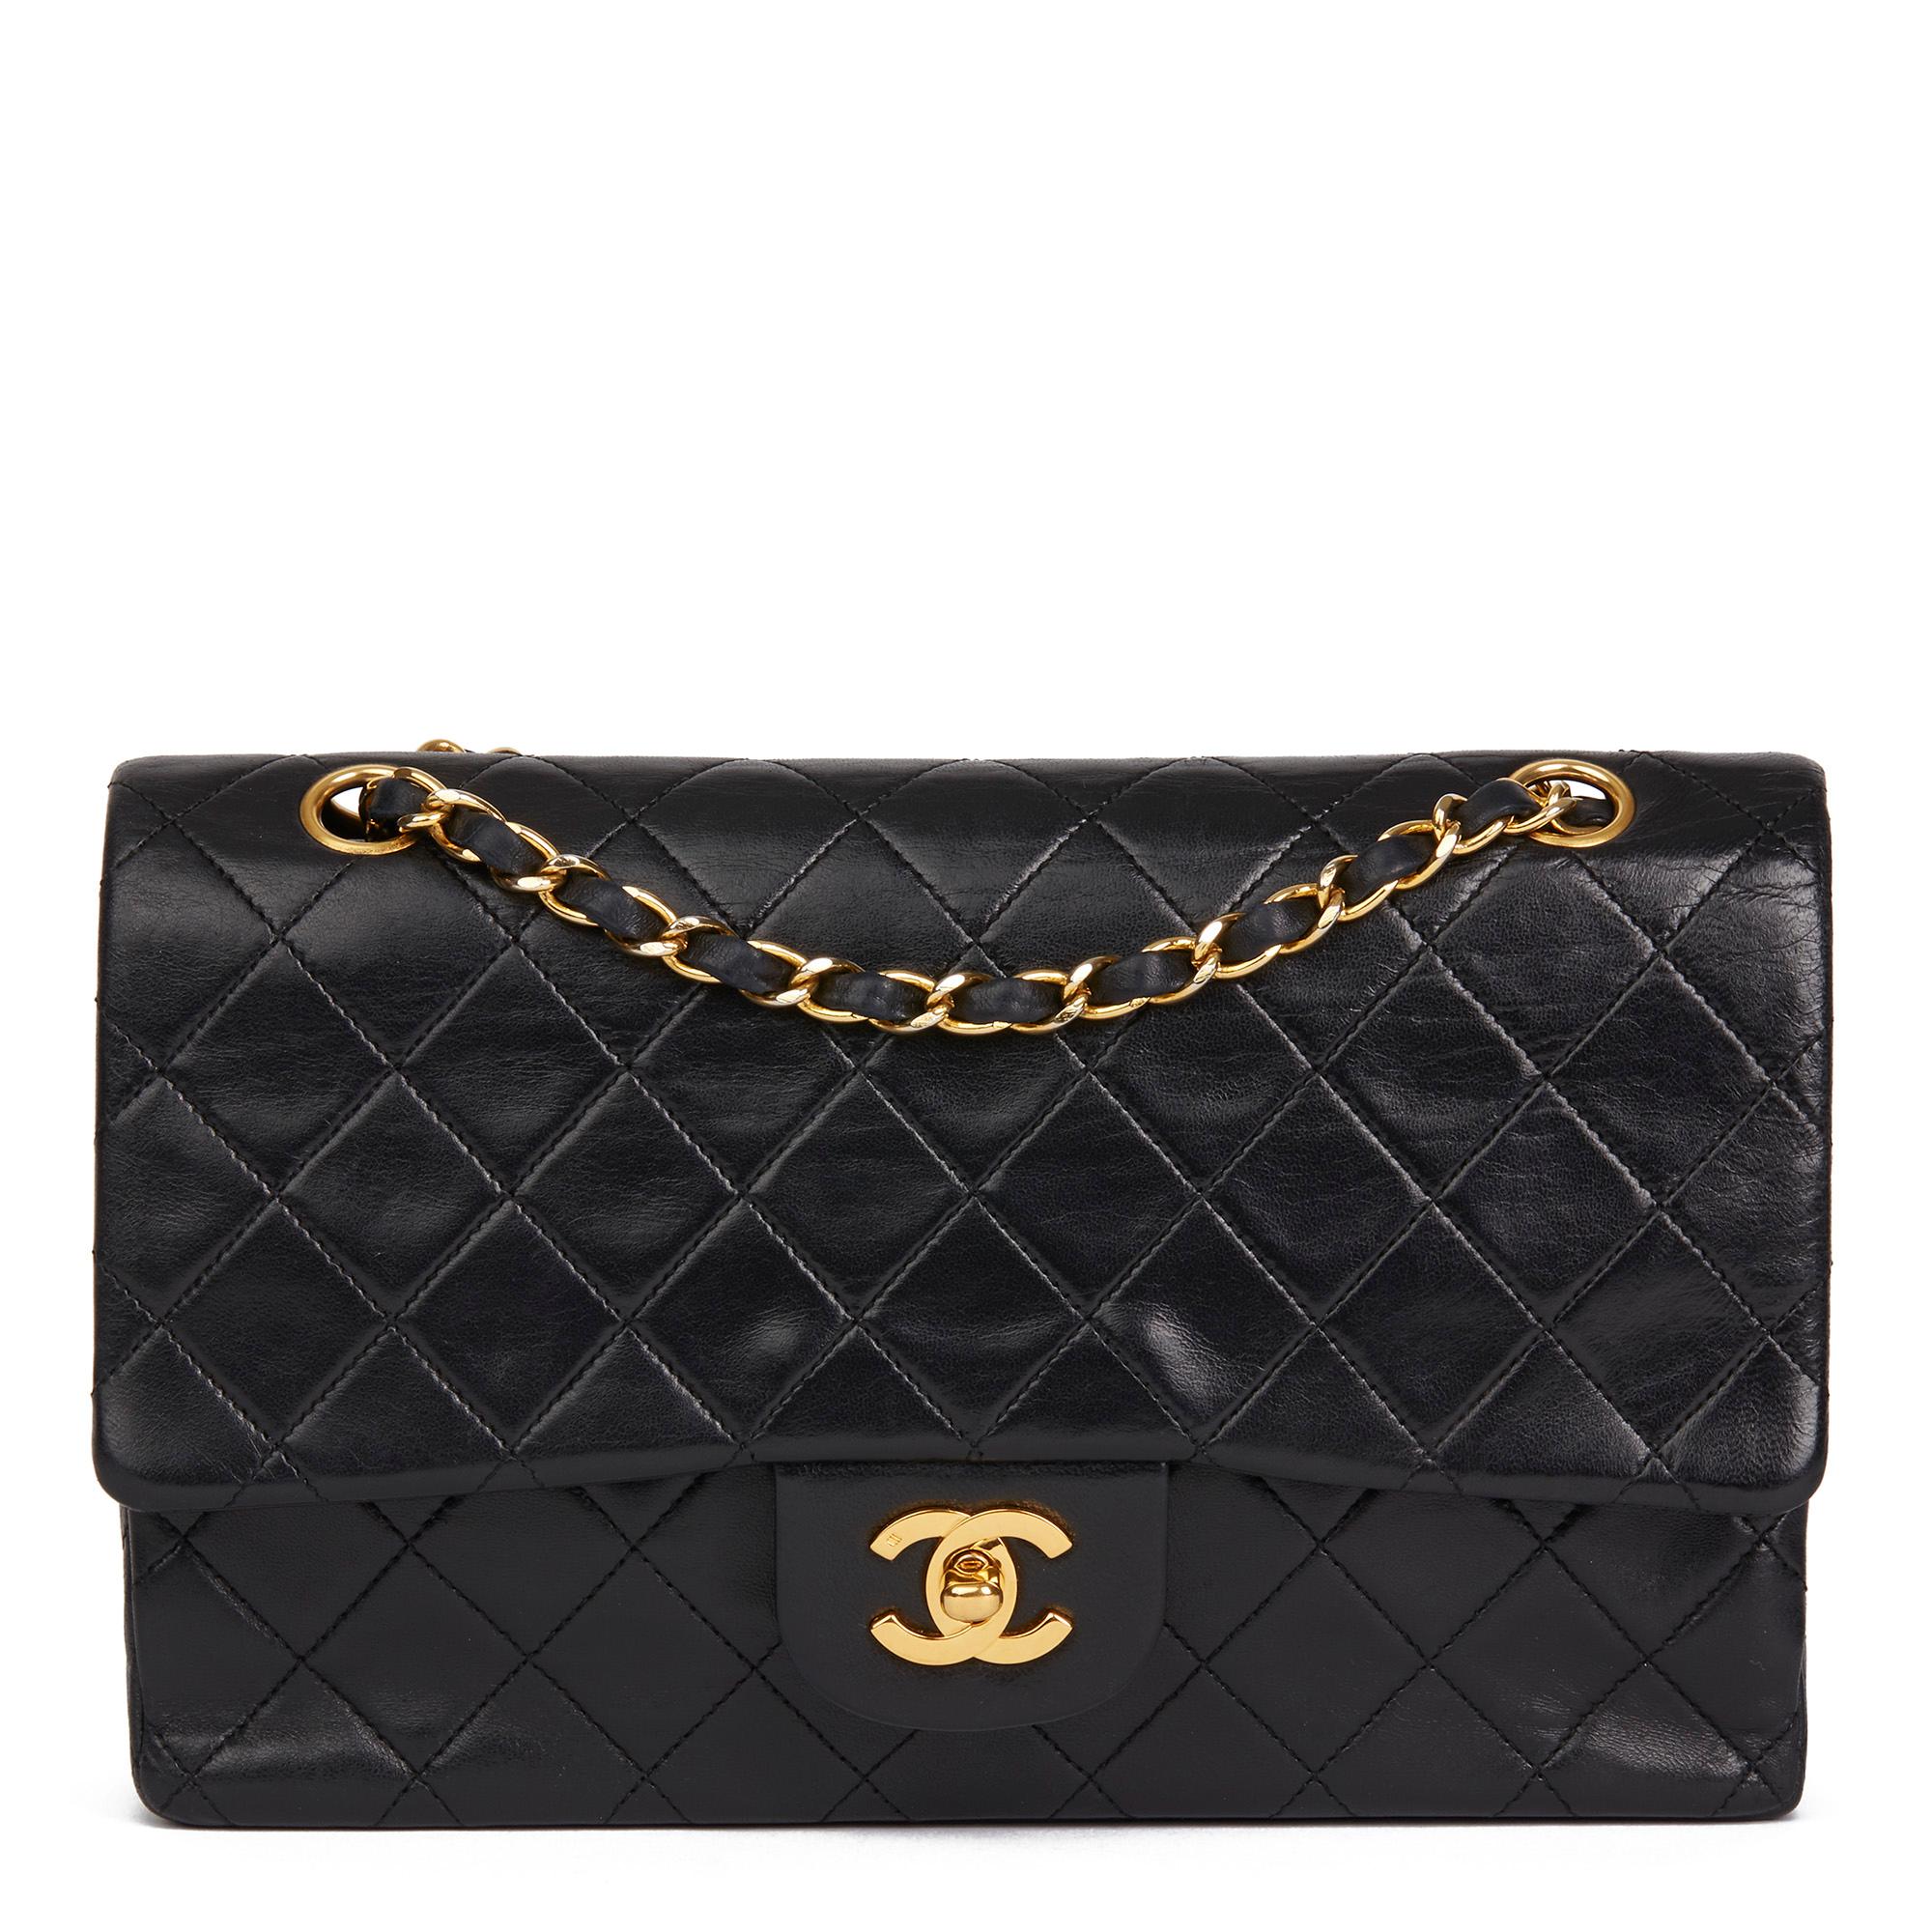 1990 Chanel Black Quilted Lambskin Vintage Medium Classic Double Flap Bag